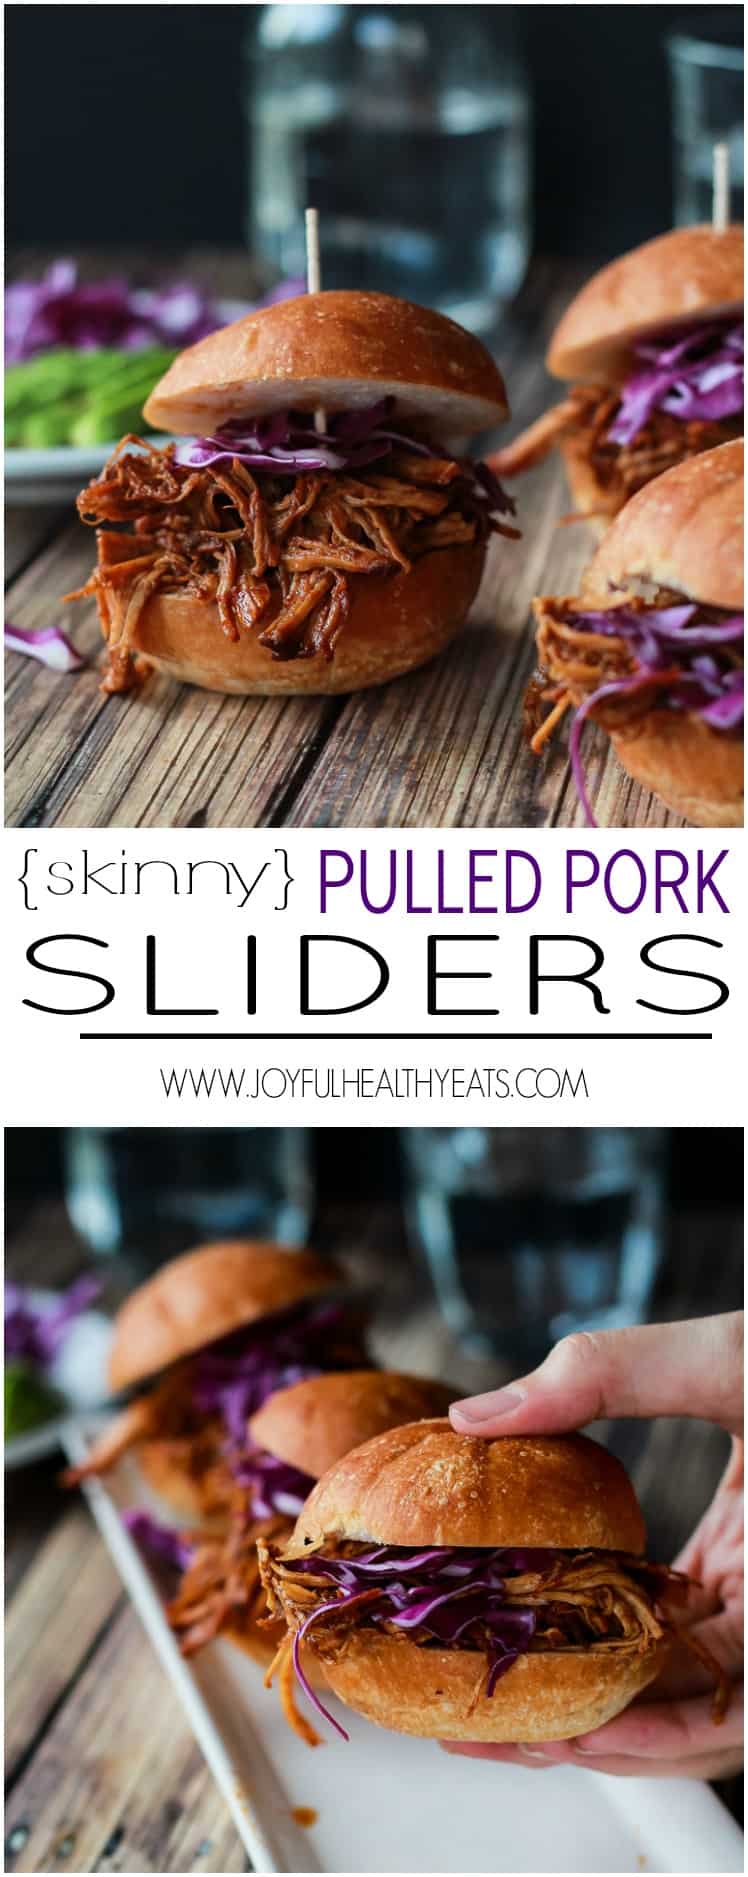 Seriously can't get enough of these! Must make for next party, so easy ... Skinny Pulled Pork Sliders | www.joyfulhealthyeats.com 